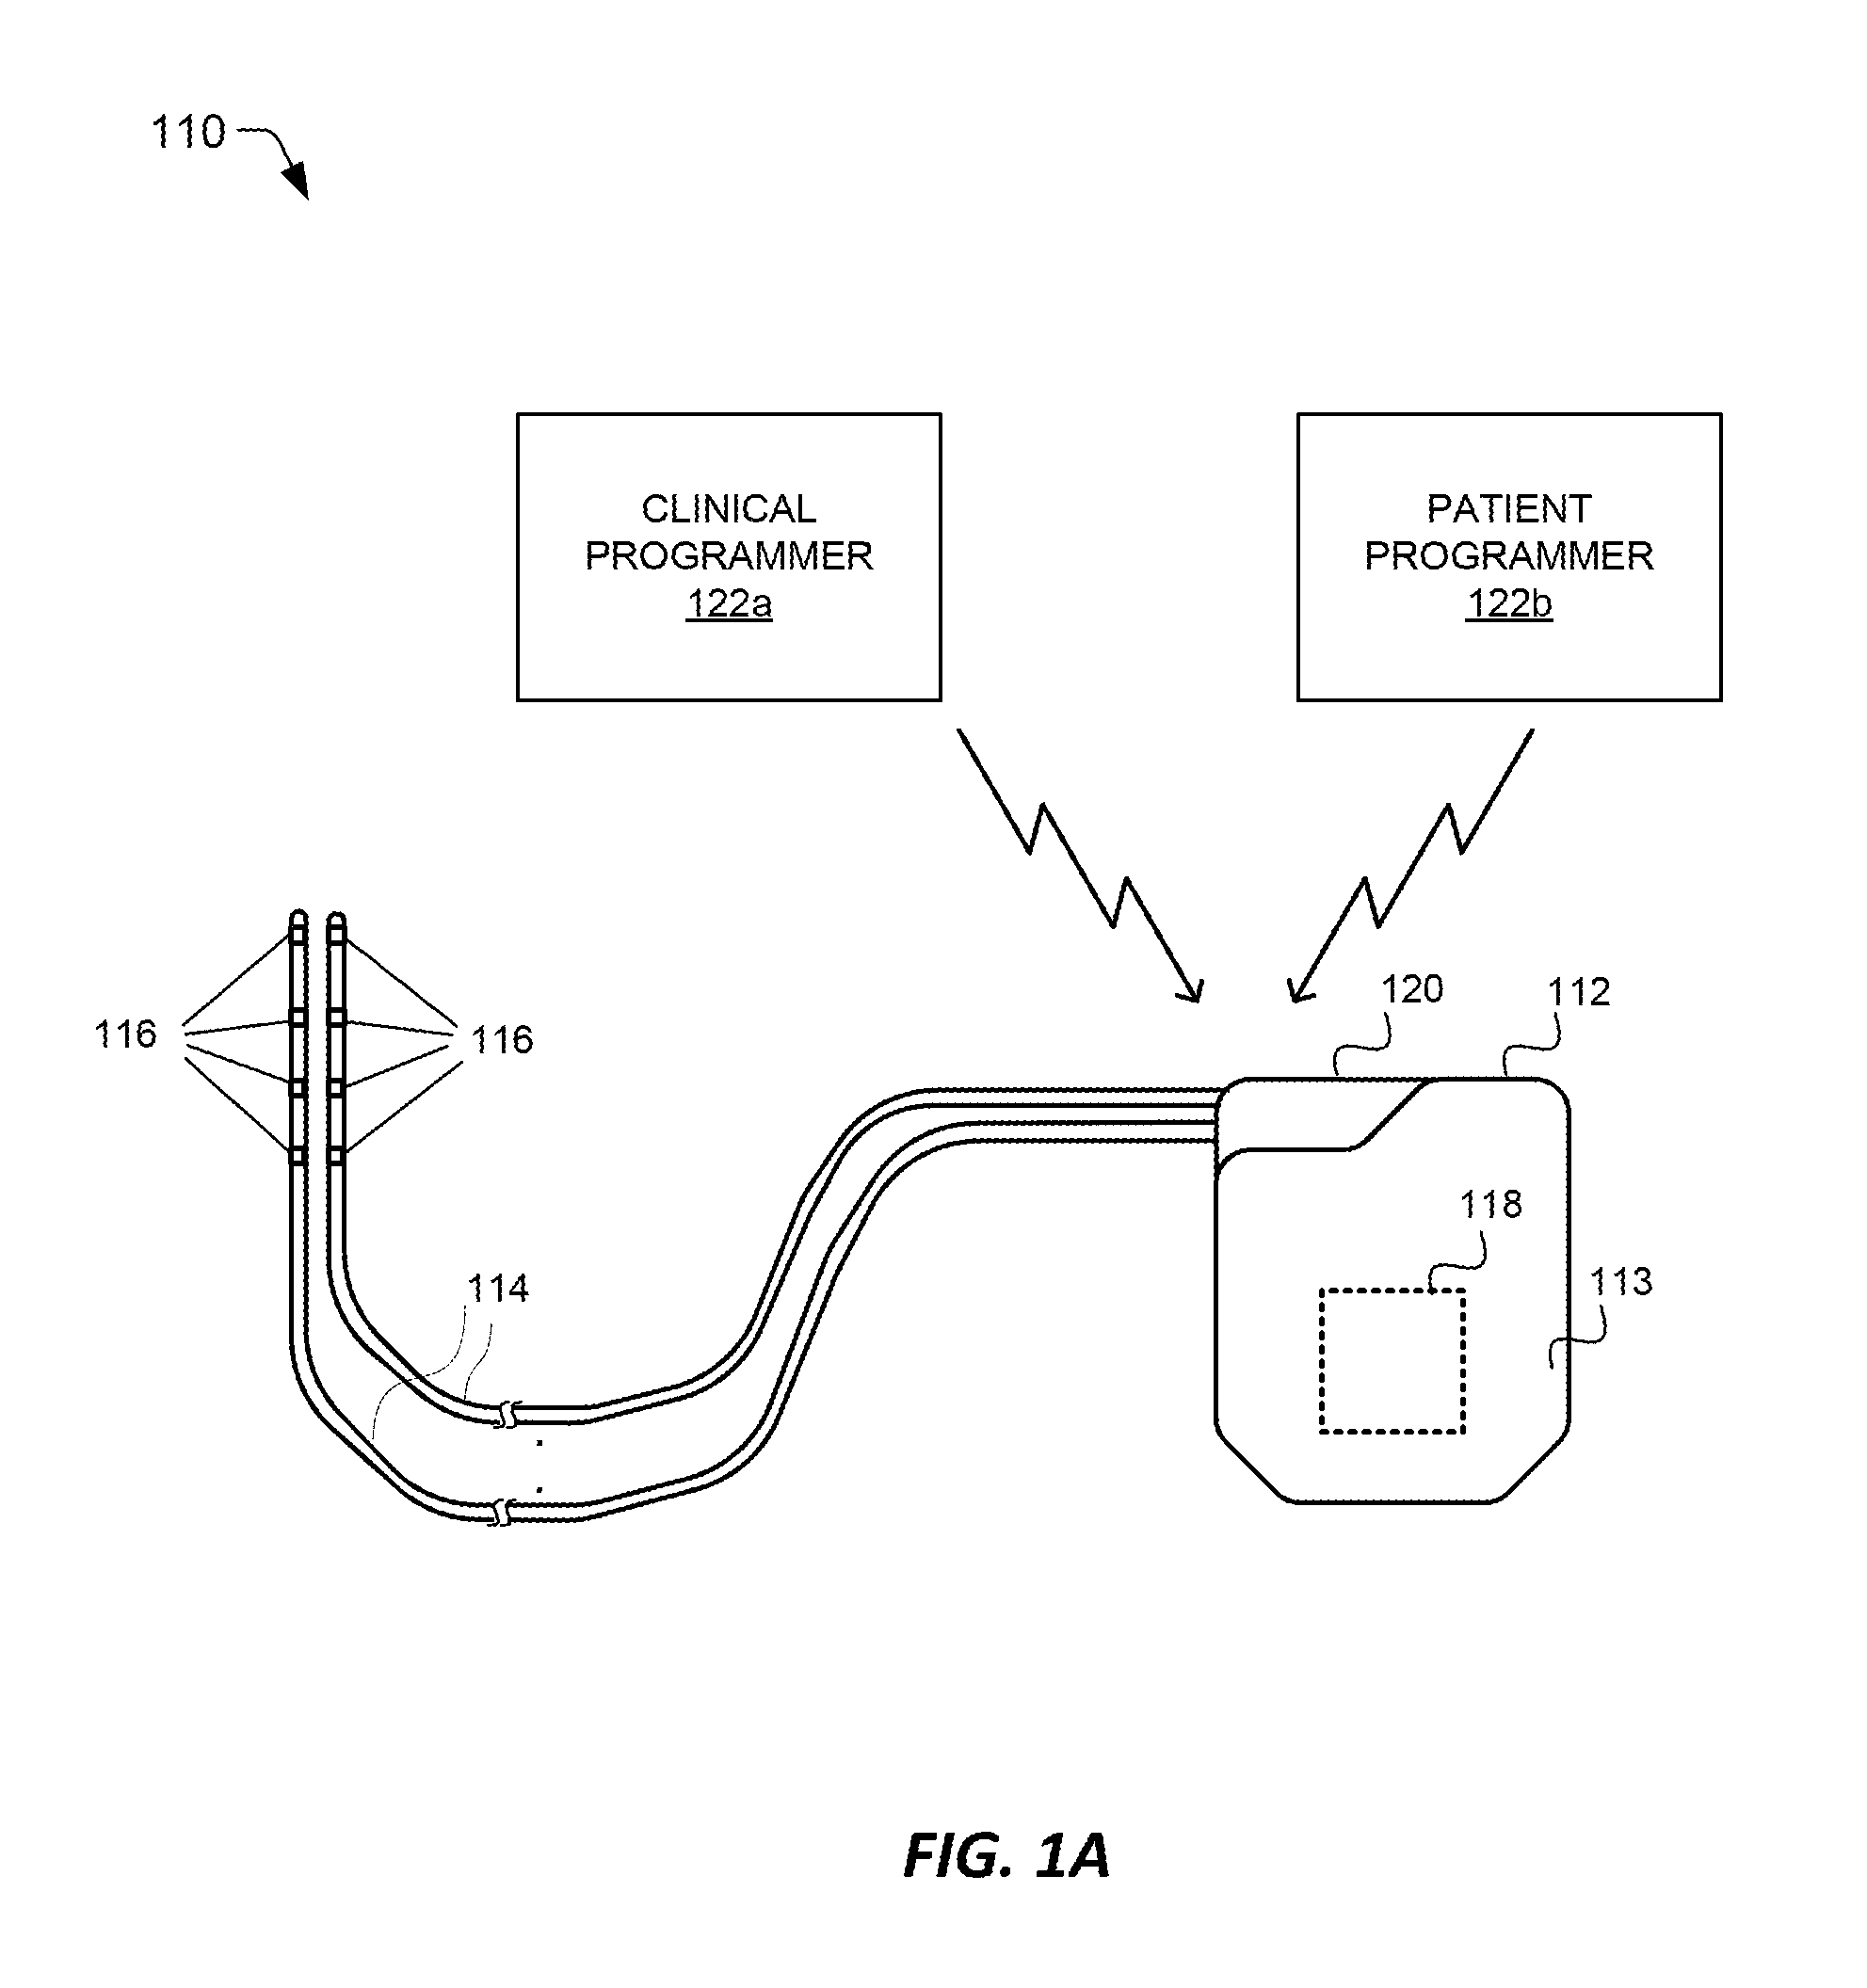 Methods and systems for automatically turning on and off drg stimulation and adjusting drg stimulation parameters